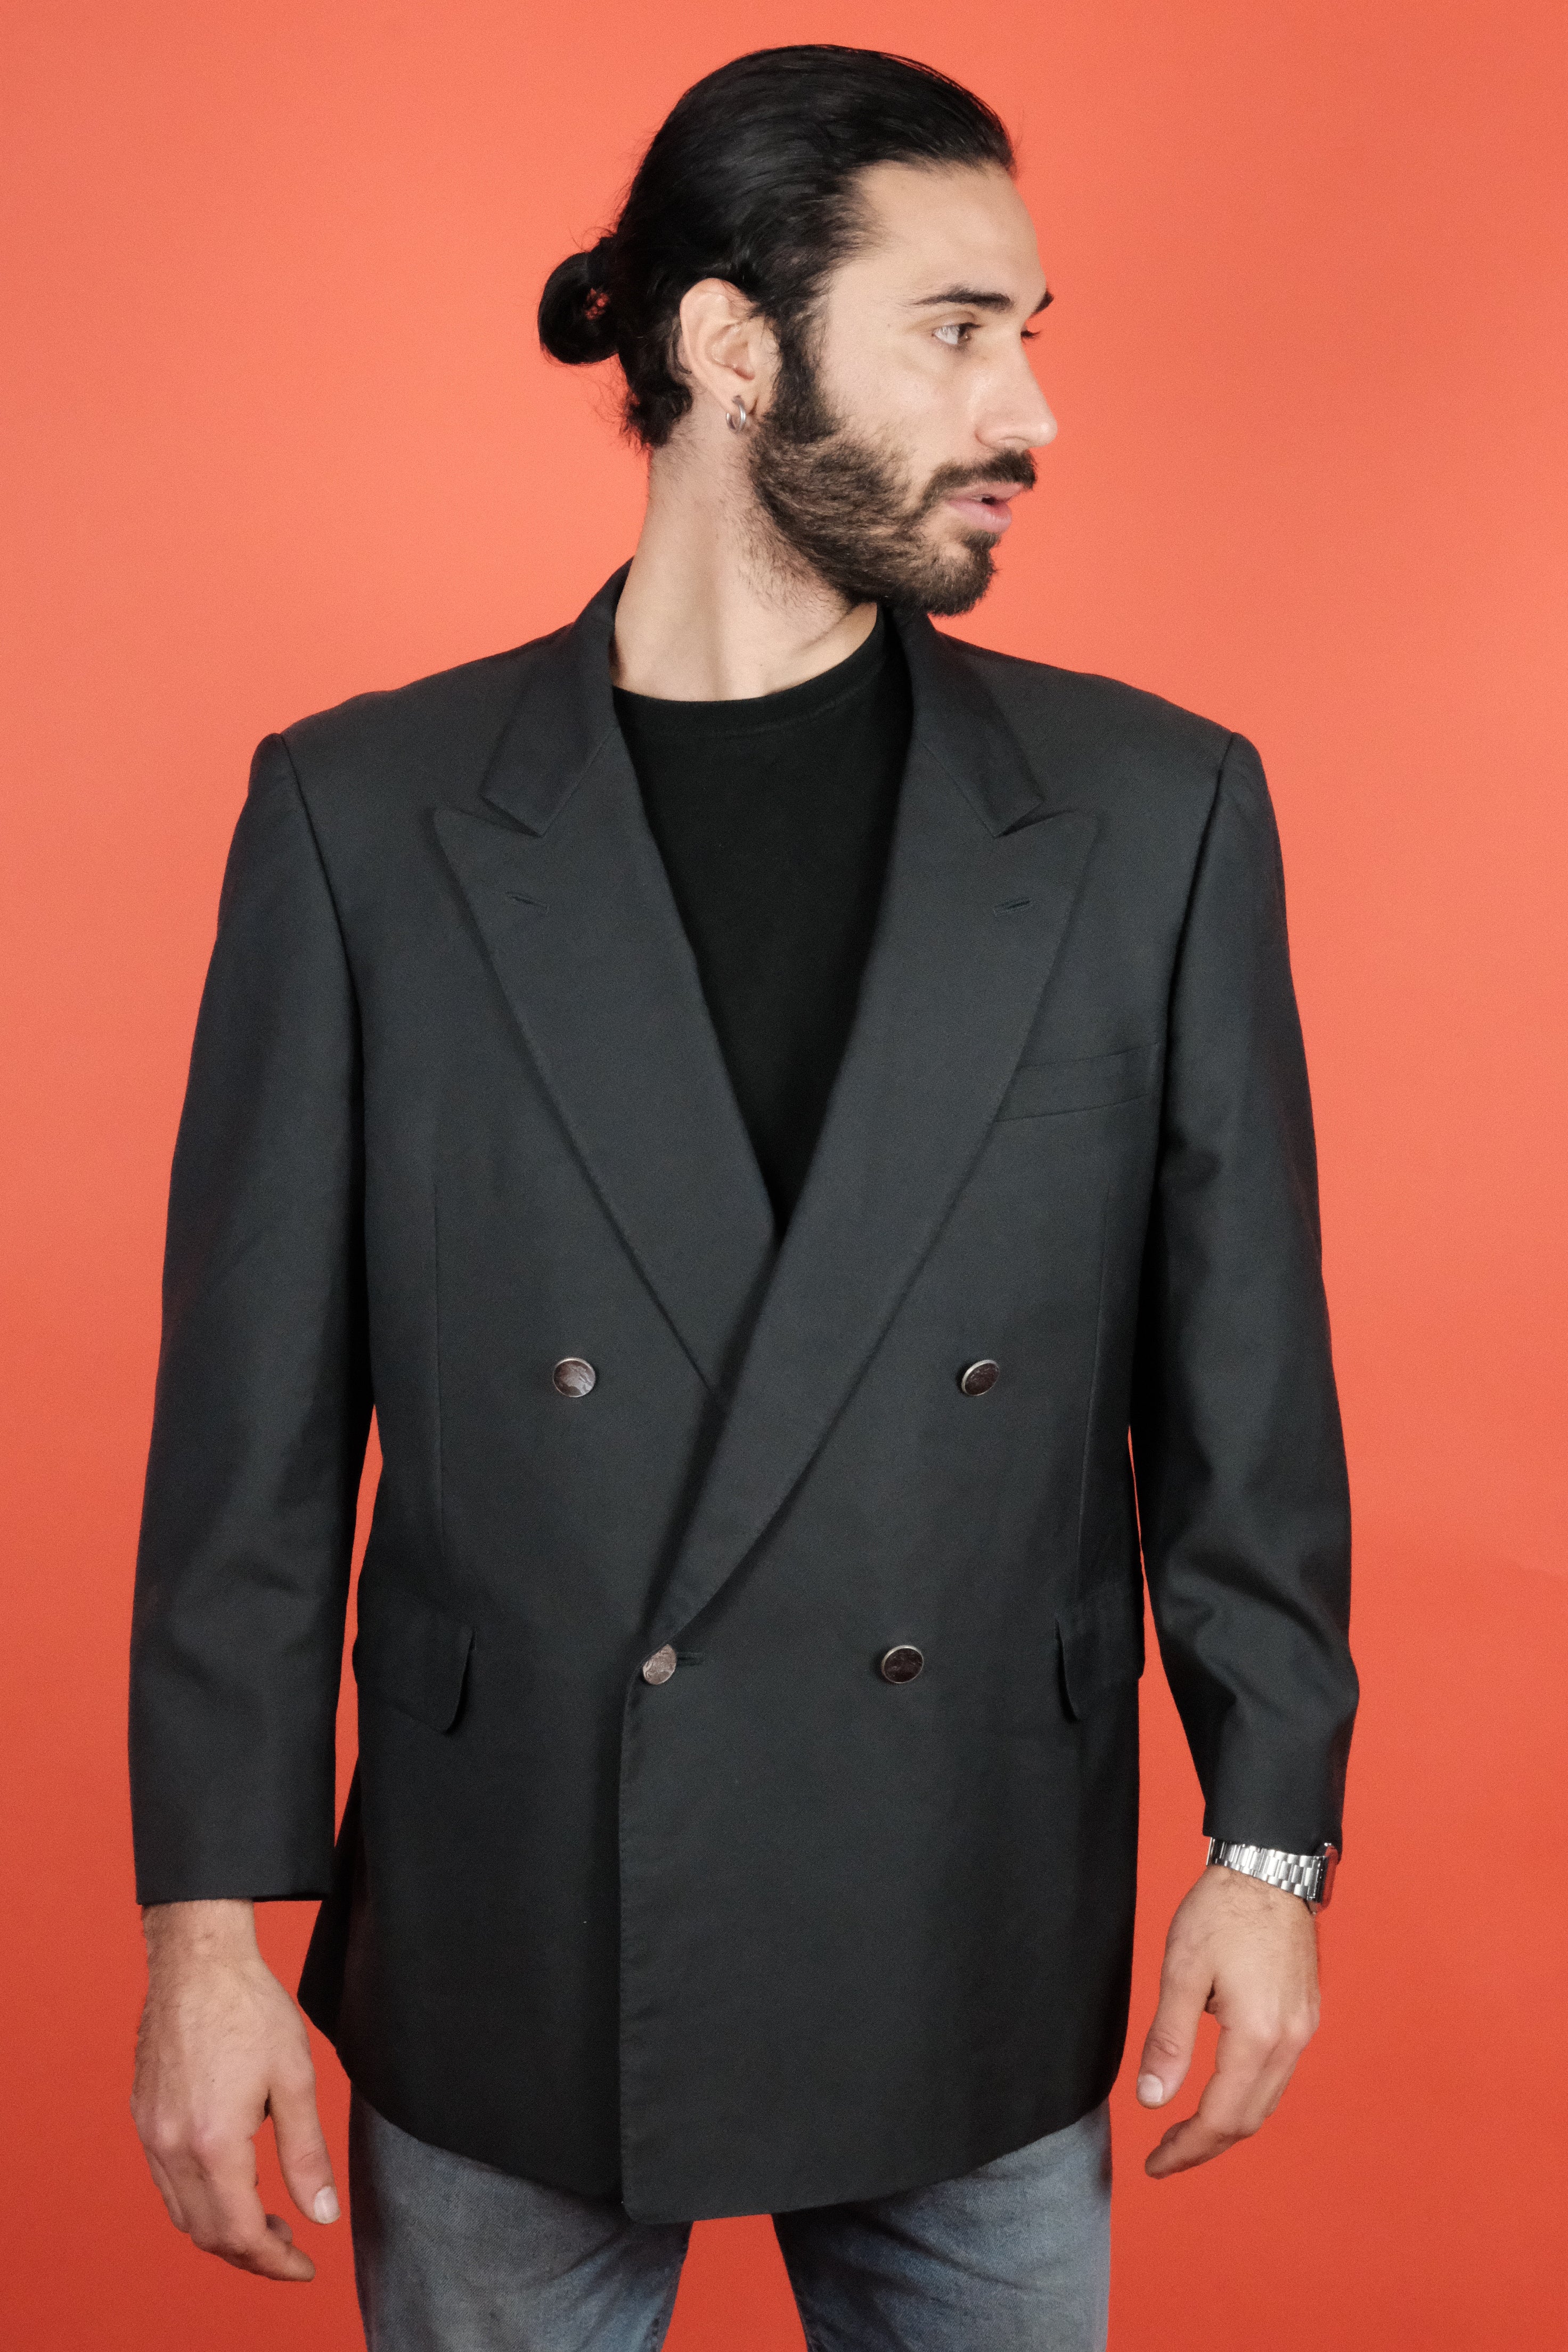 Burberrys' Prestige Collection Double Breasted Suit Jacket 'L'